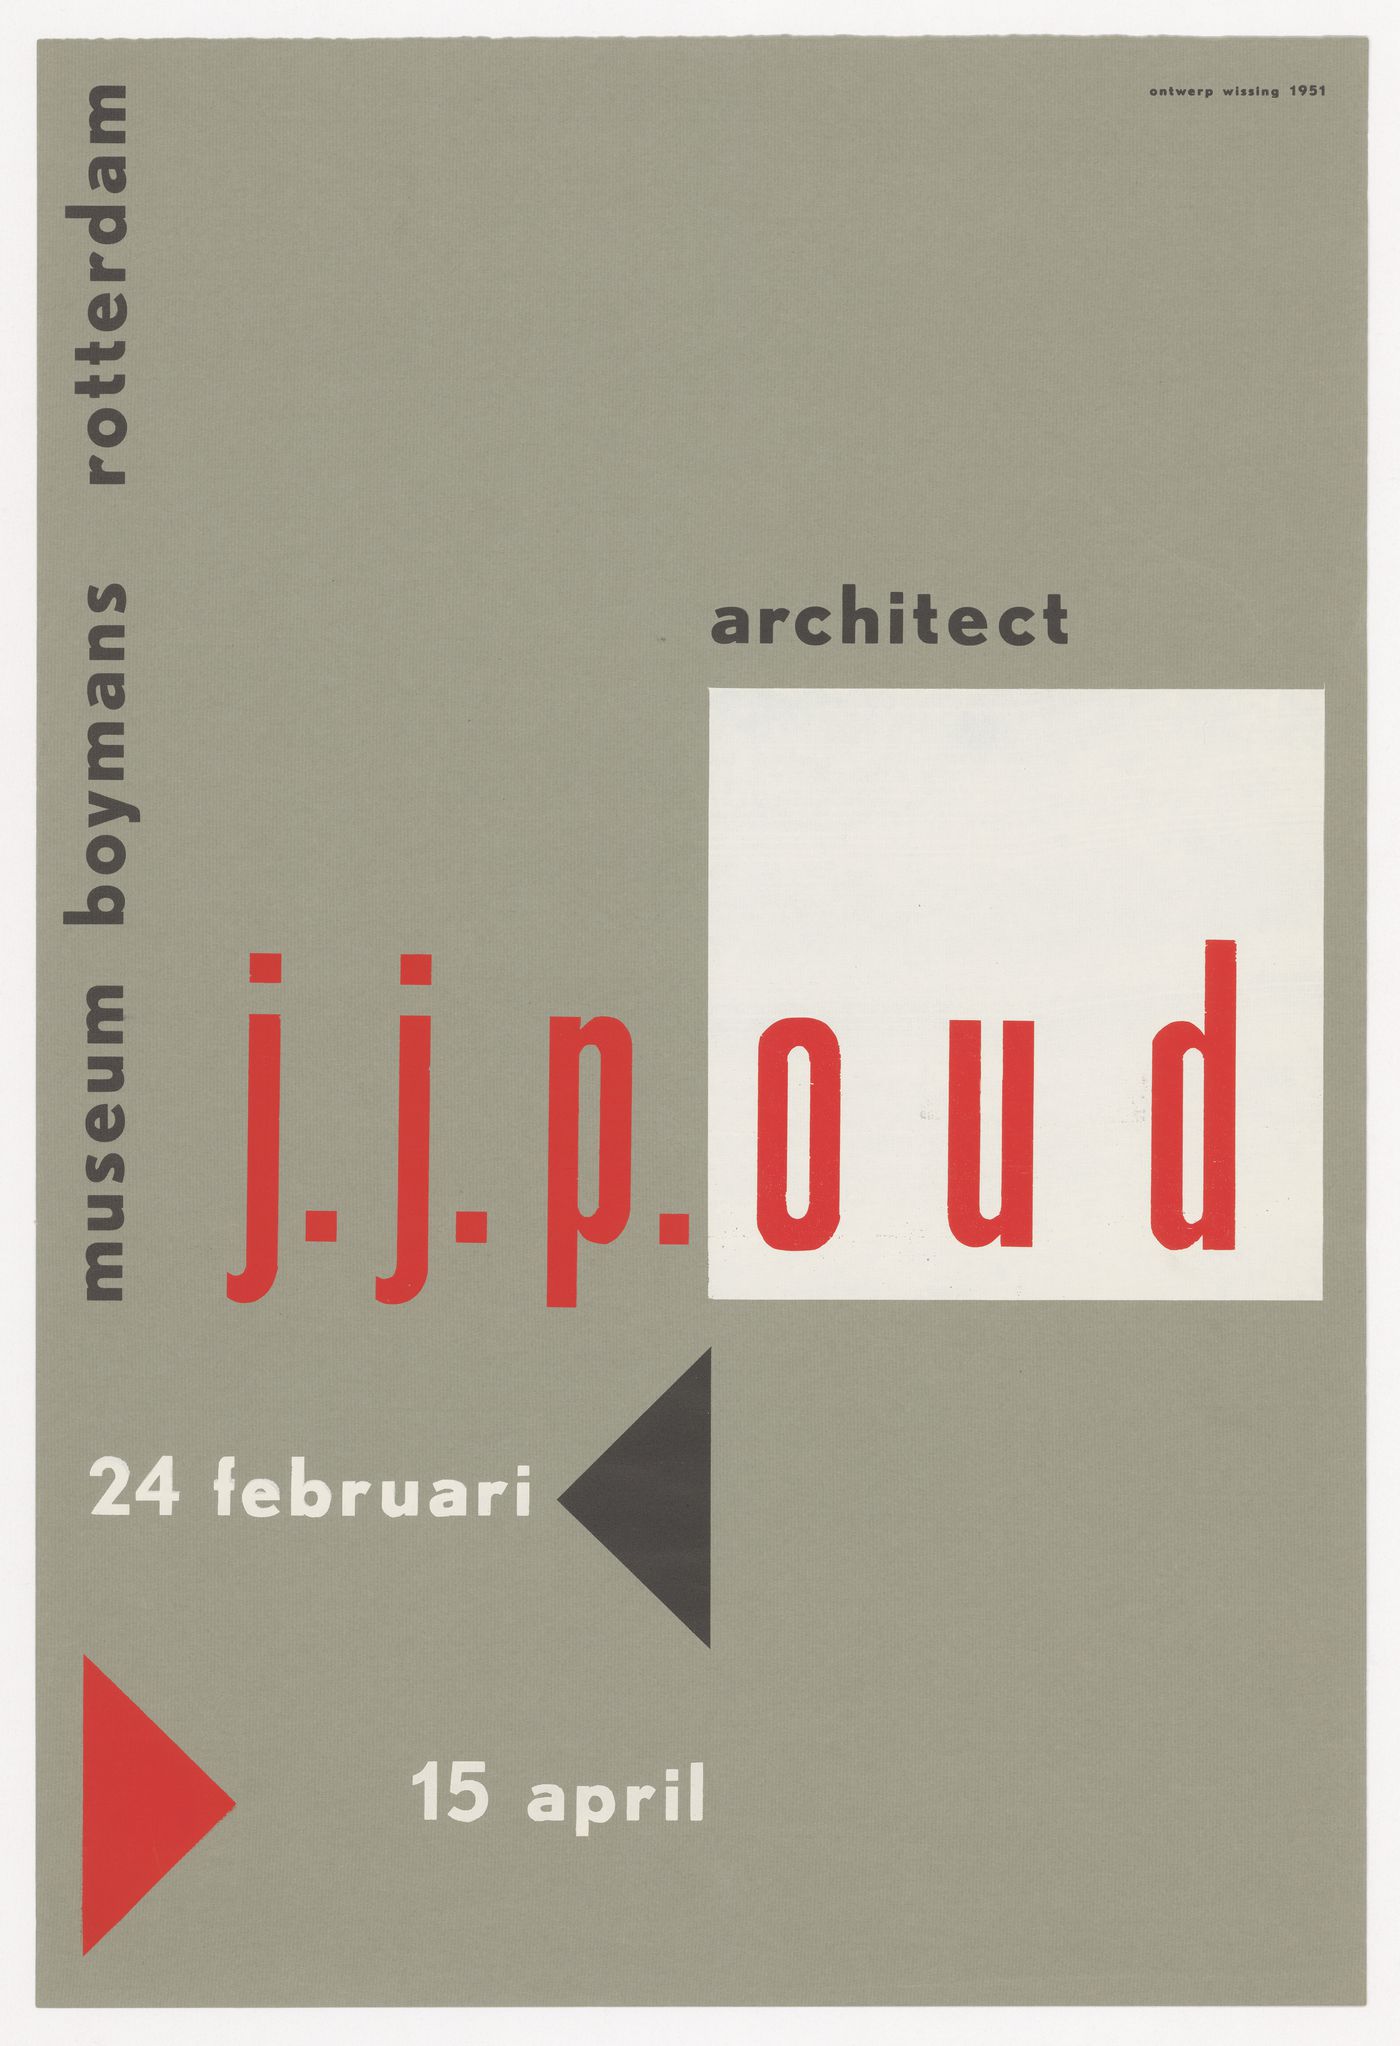 Poster announcing the 1951 J.J.P. Oud exhibition at the Boymans Museum, Rotterdam, Netherlands